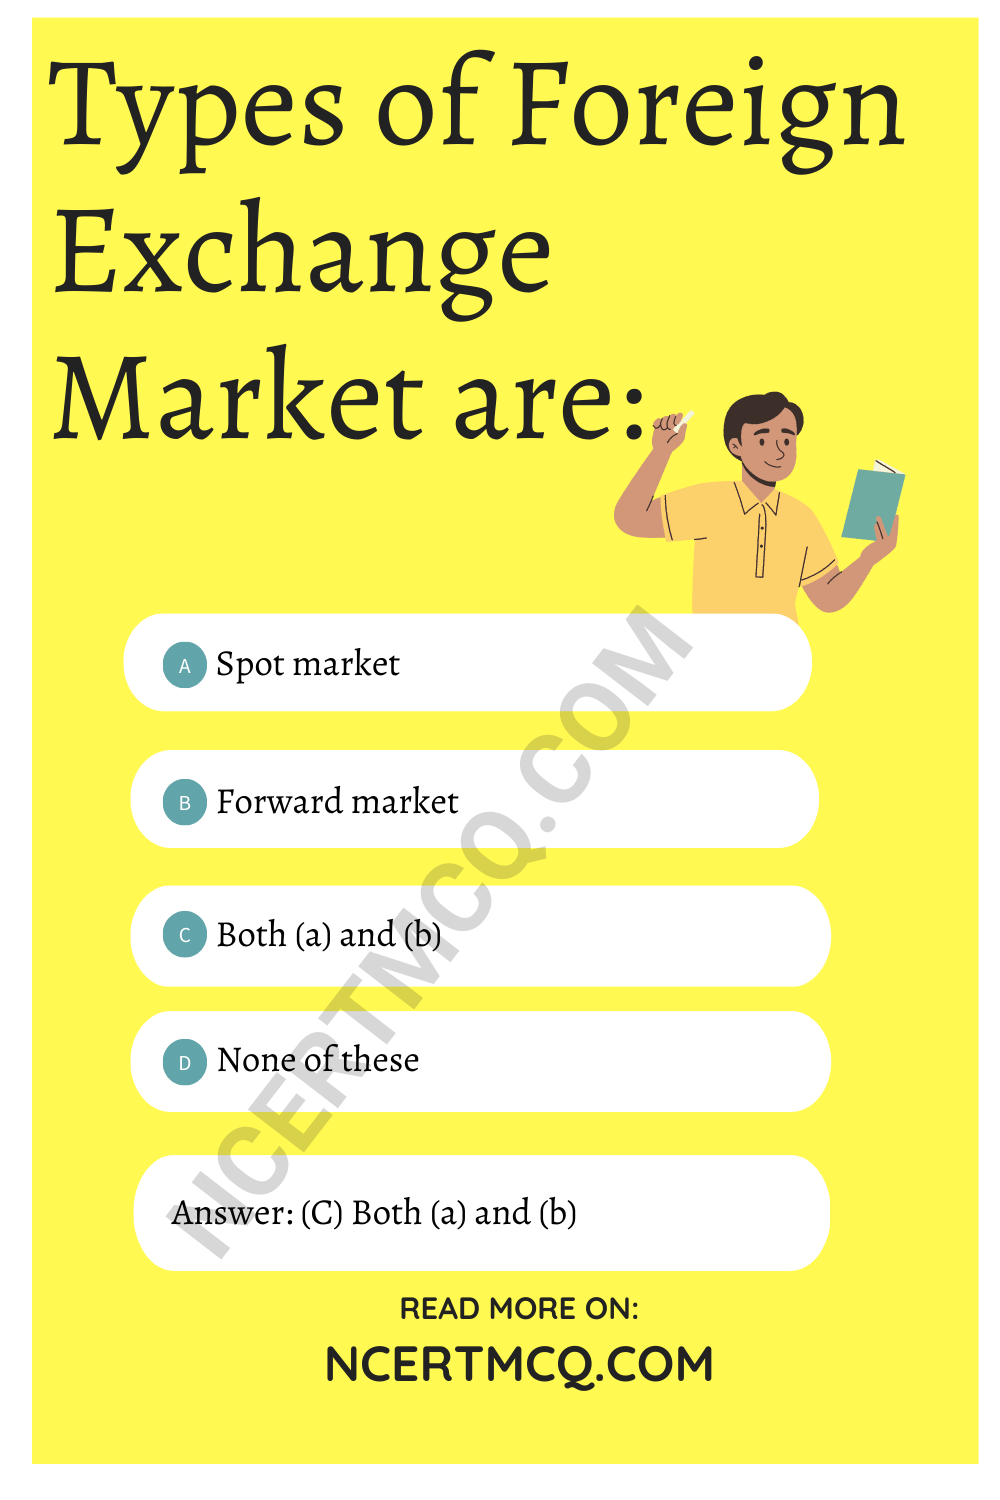 Types of Foreign Exchange Market are: